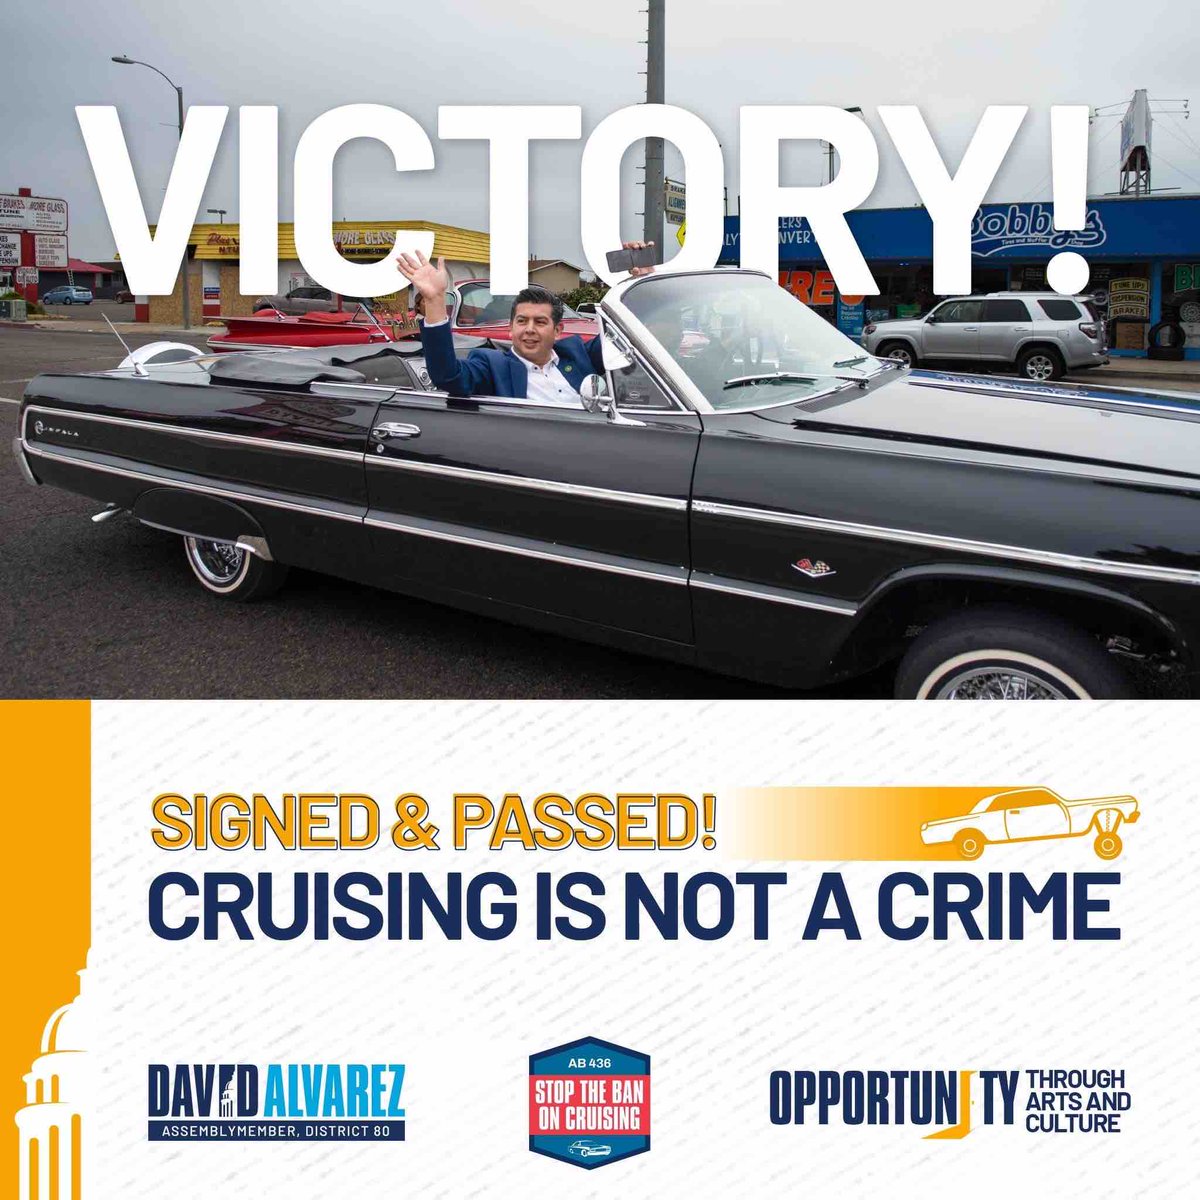 MAJOR WIN! 🚗 On behalf of the thousands of advocates who supported this culturally significant legislation, the low rider communities and car clubs from all over California, I would like to thank the Governor for signing AB 436 into law. #cruisingisnotacrime